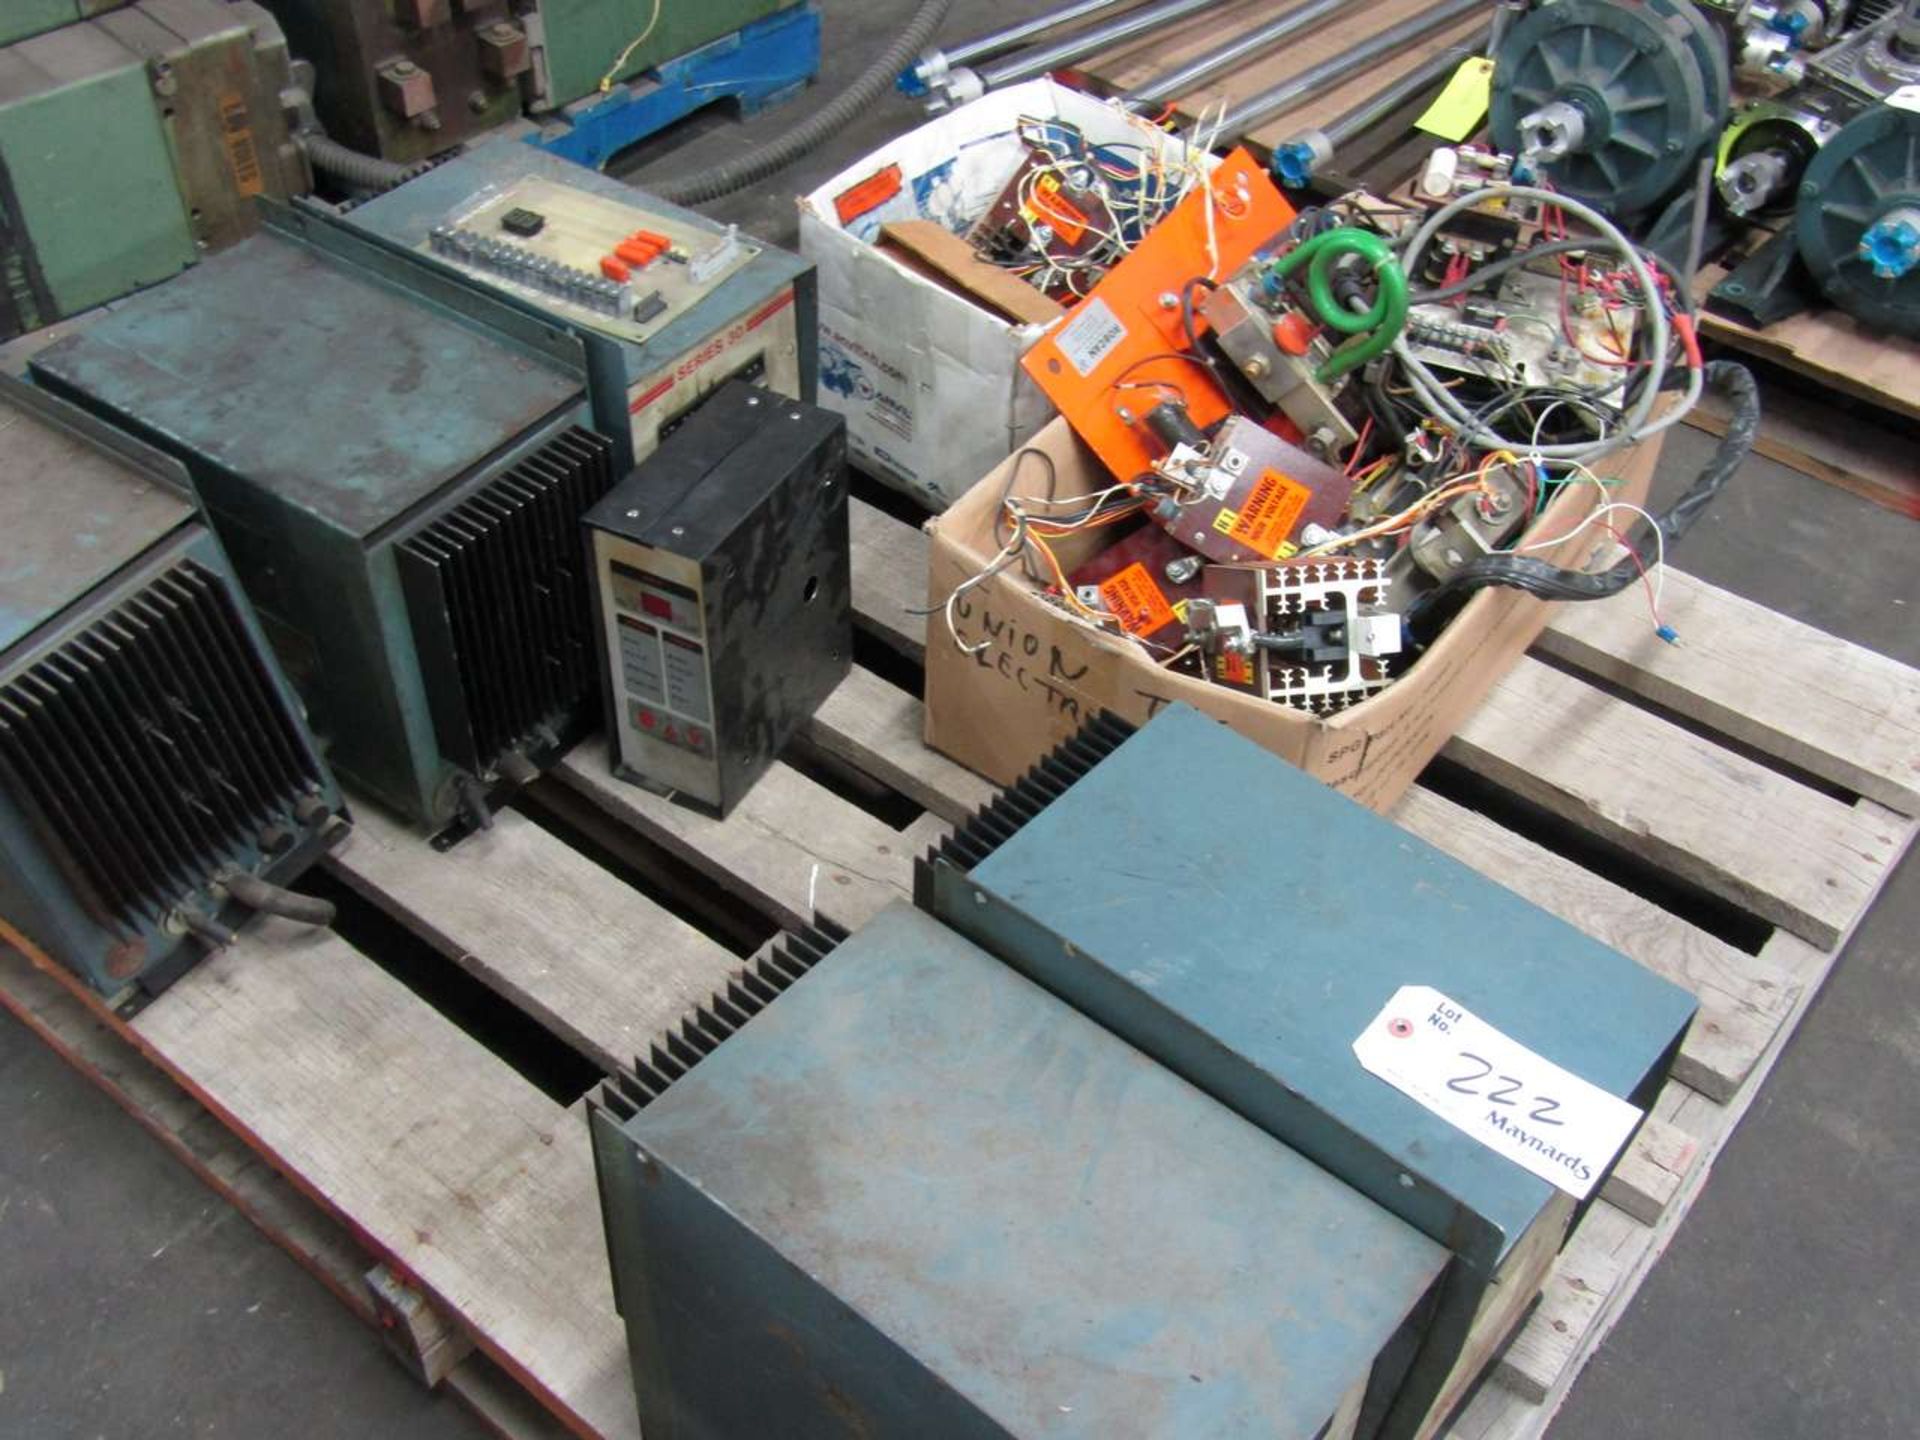 2 Skids of Control Panels for welders